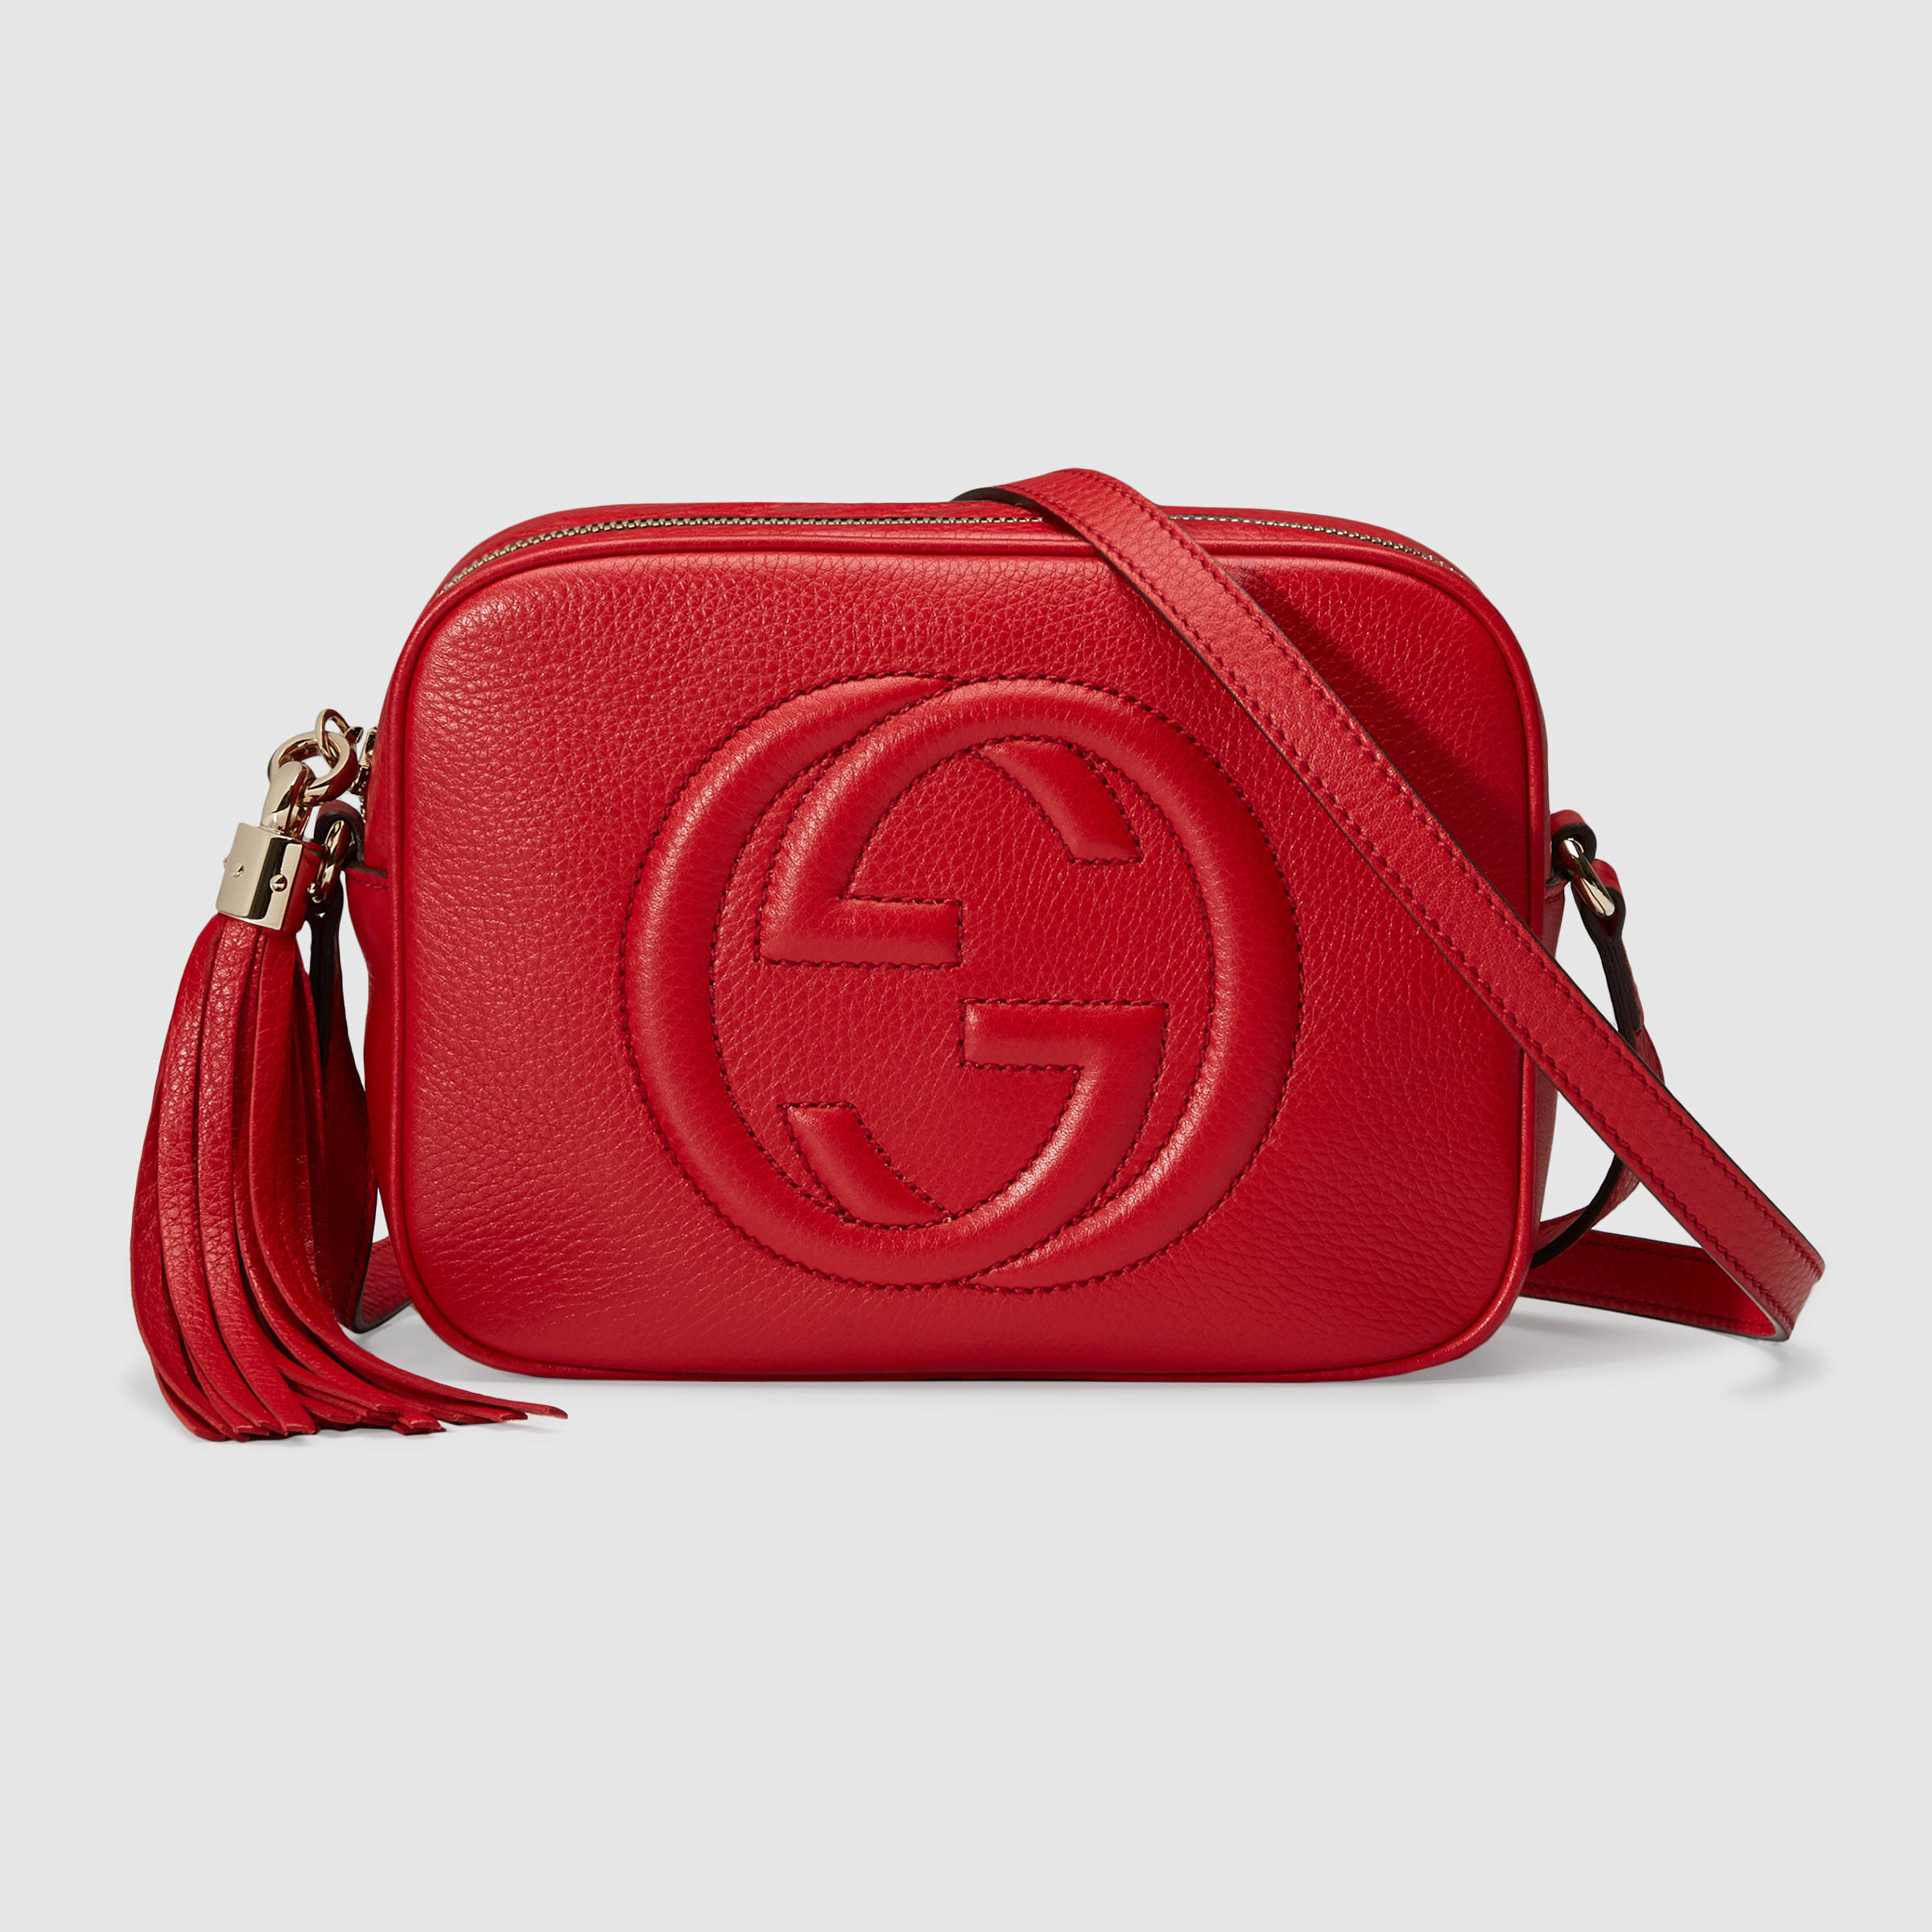 Gucci Soho Leather Disco Bag in Red (red leather) | Lyst